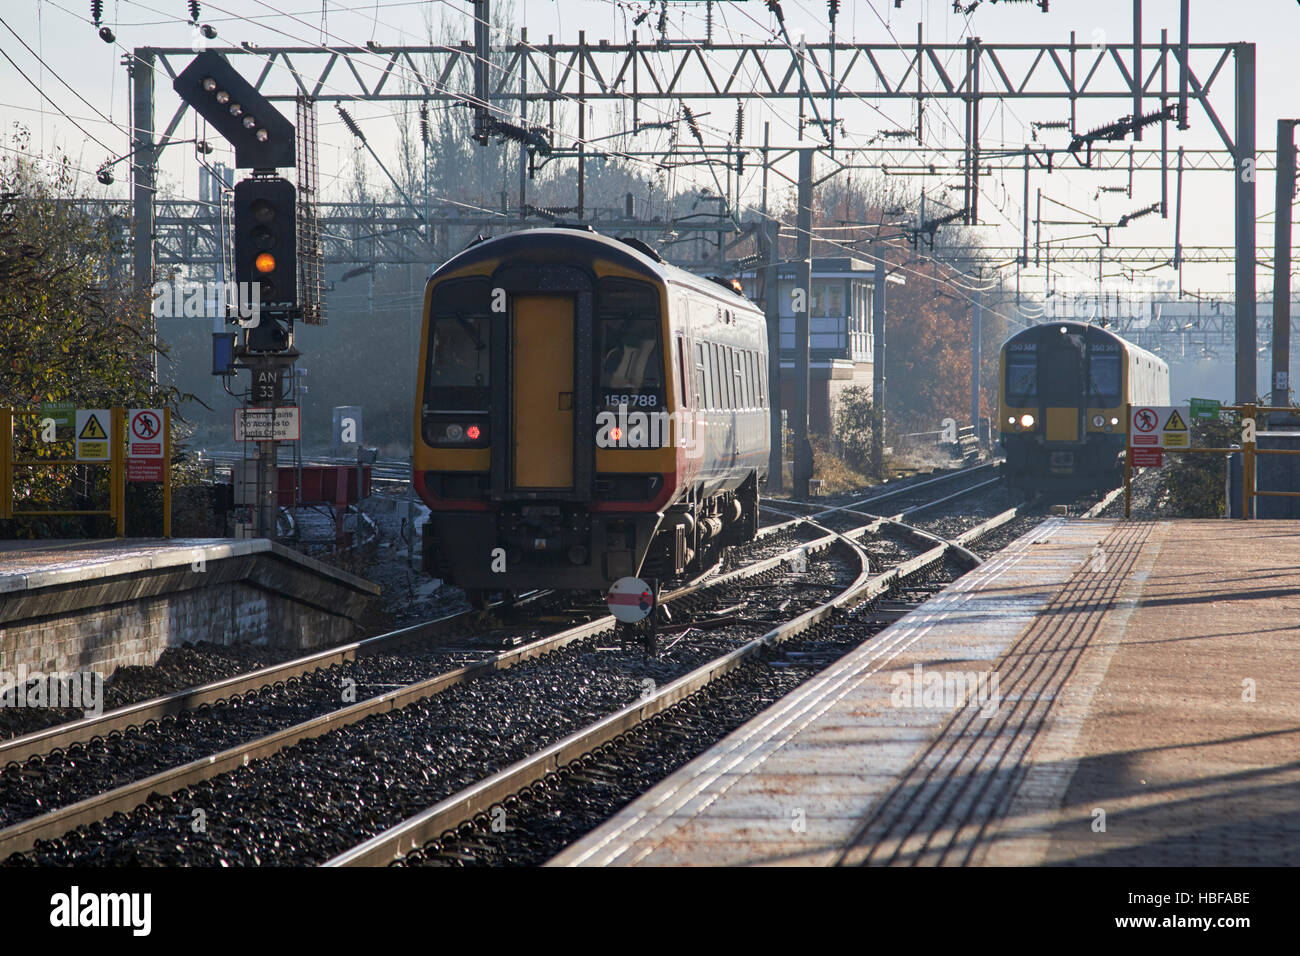 local trains passing on train line junction in a rail station in the uk Stock Photo